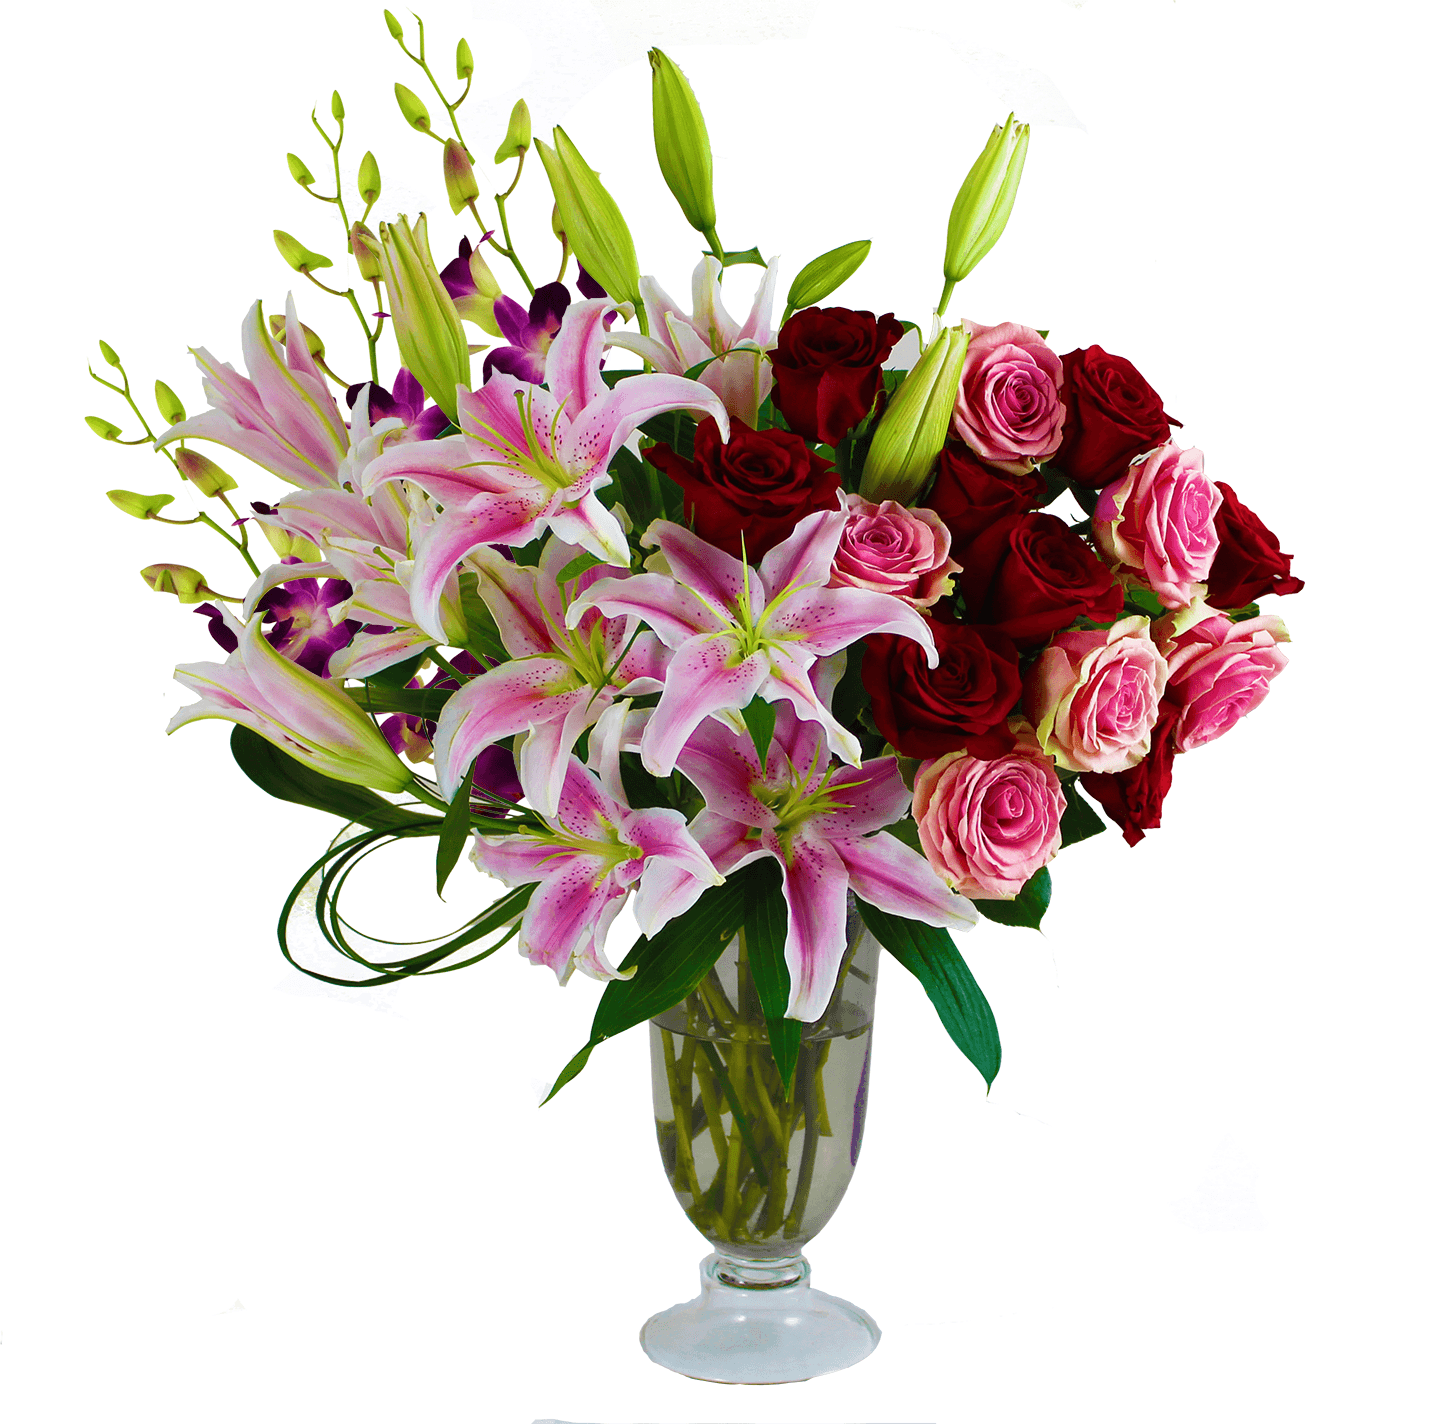 Opulent Roses and Lilies